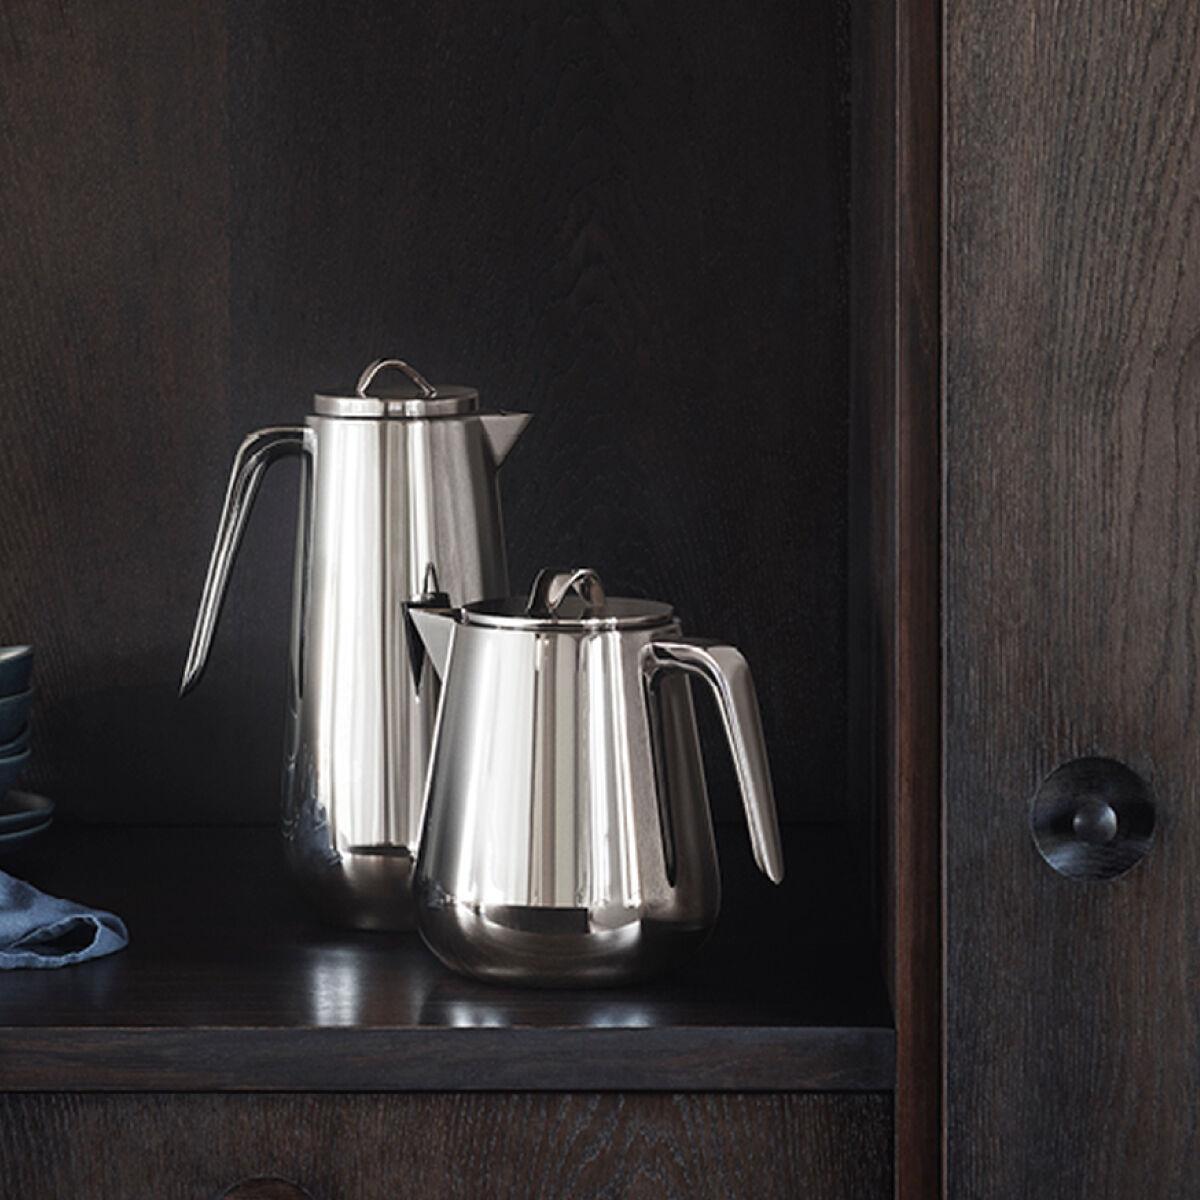 Elevate your morning cuppa and bring some Scandinavian minimalism to afternoon tea with this unique stainless steel tea pot. The ergonomic and modern shape combined with the high shine of the surface give it an almost sculptural quality that is sure